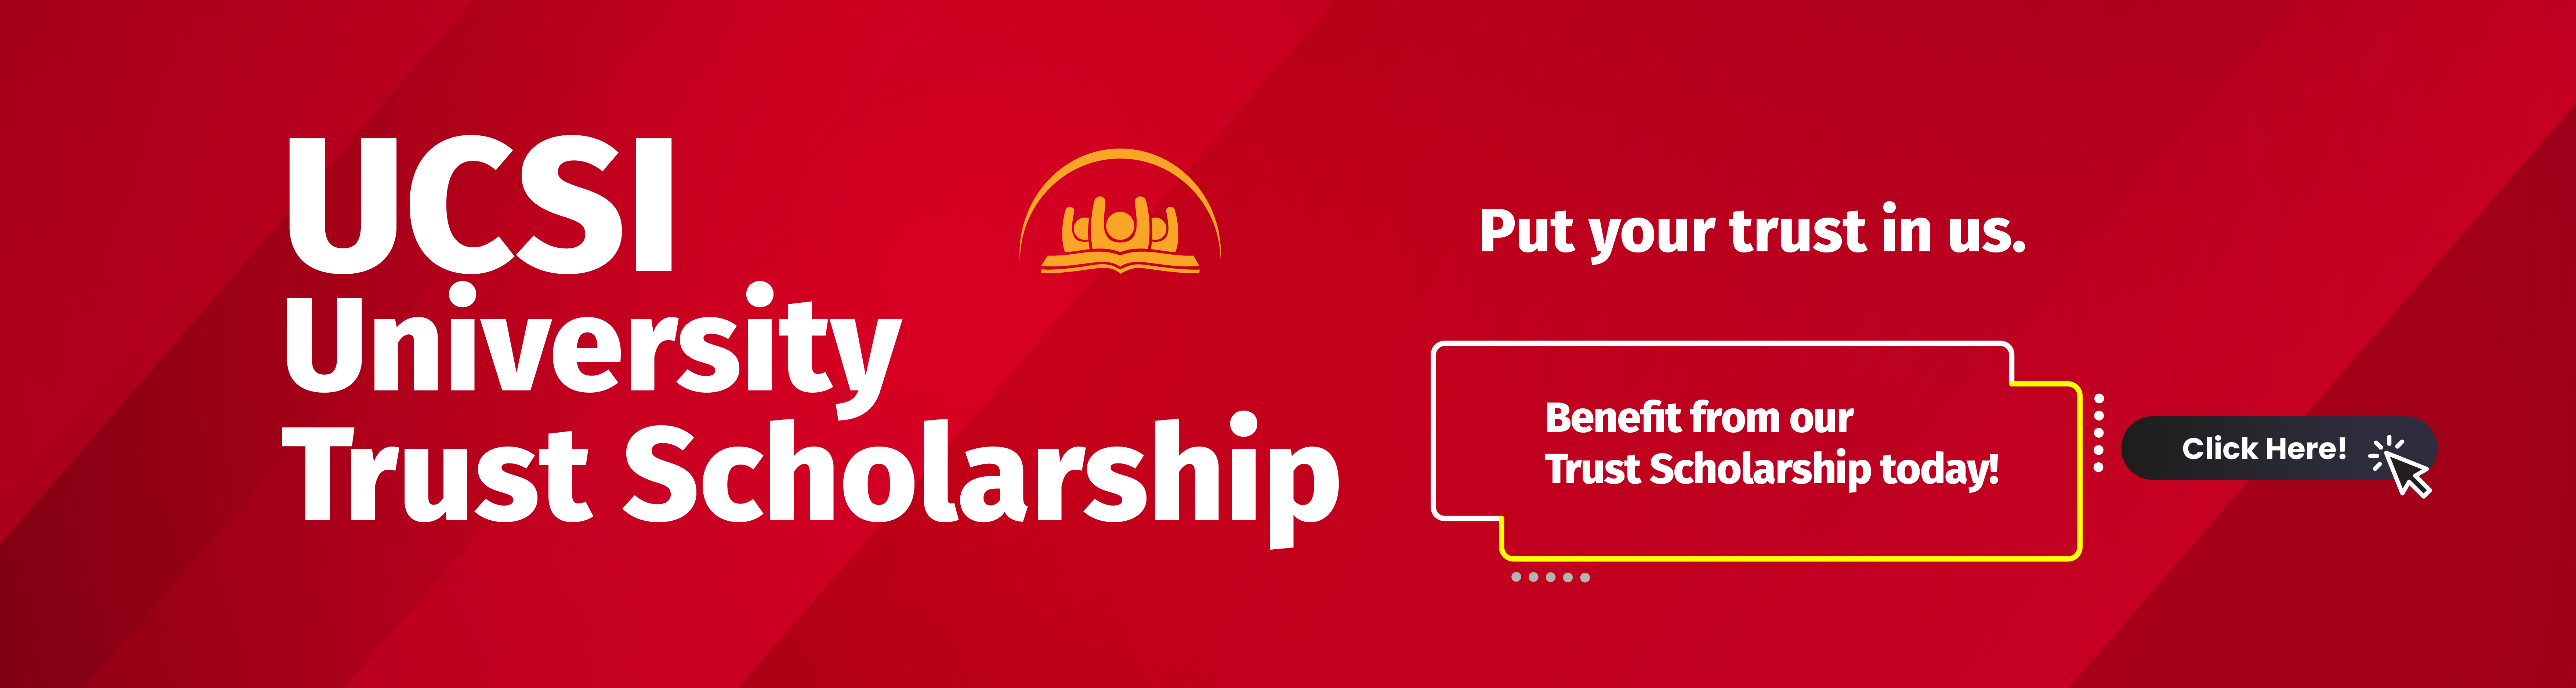 Putting Your Trust In Us. Benefit from UCSI Universityâ€™s Trust Scholarship today